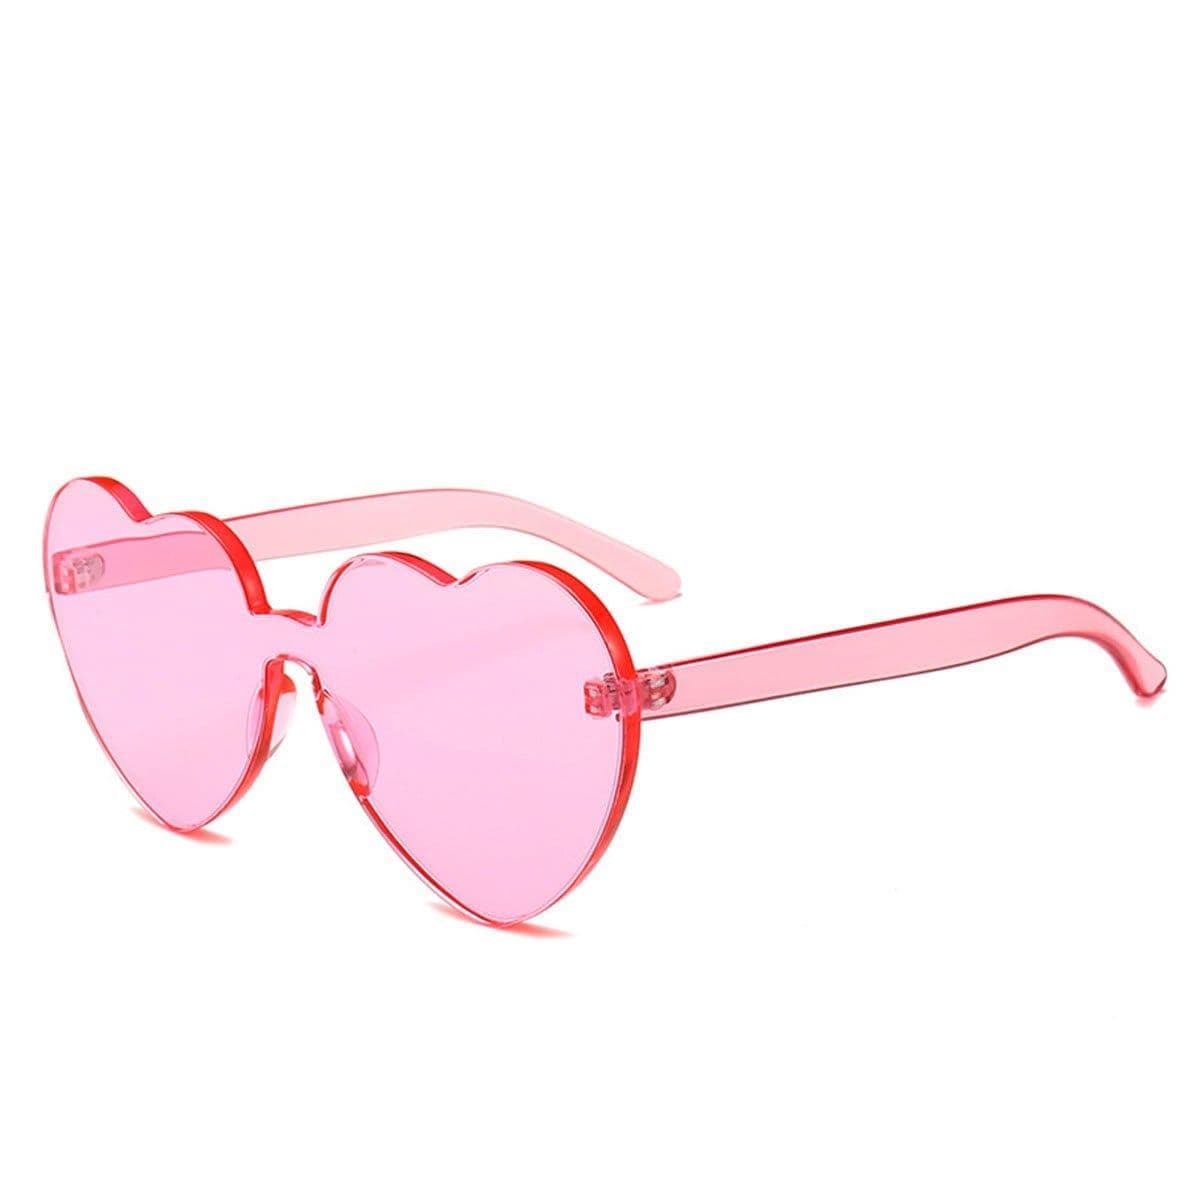 Buy Costume Accessories Pink Fashion Shaped Sunglasse for Adults sold at Party Expert